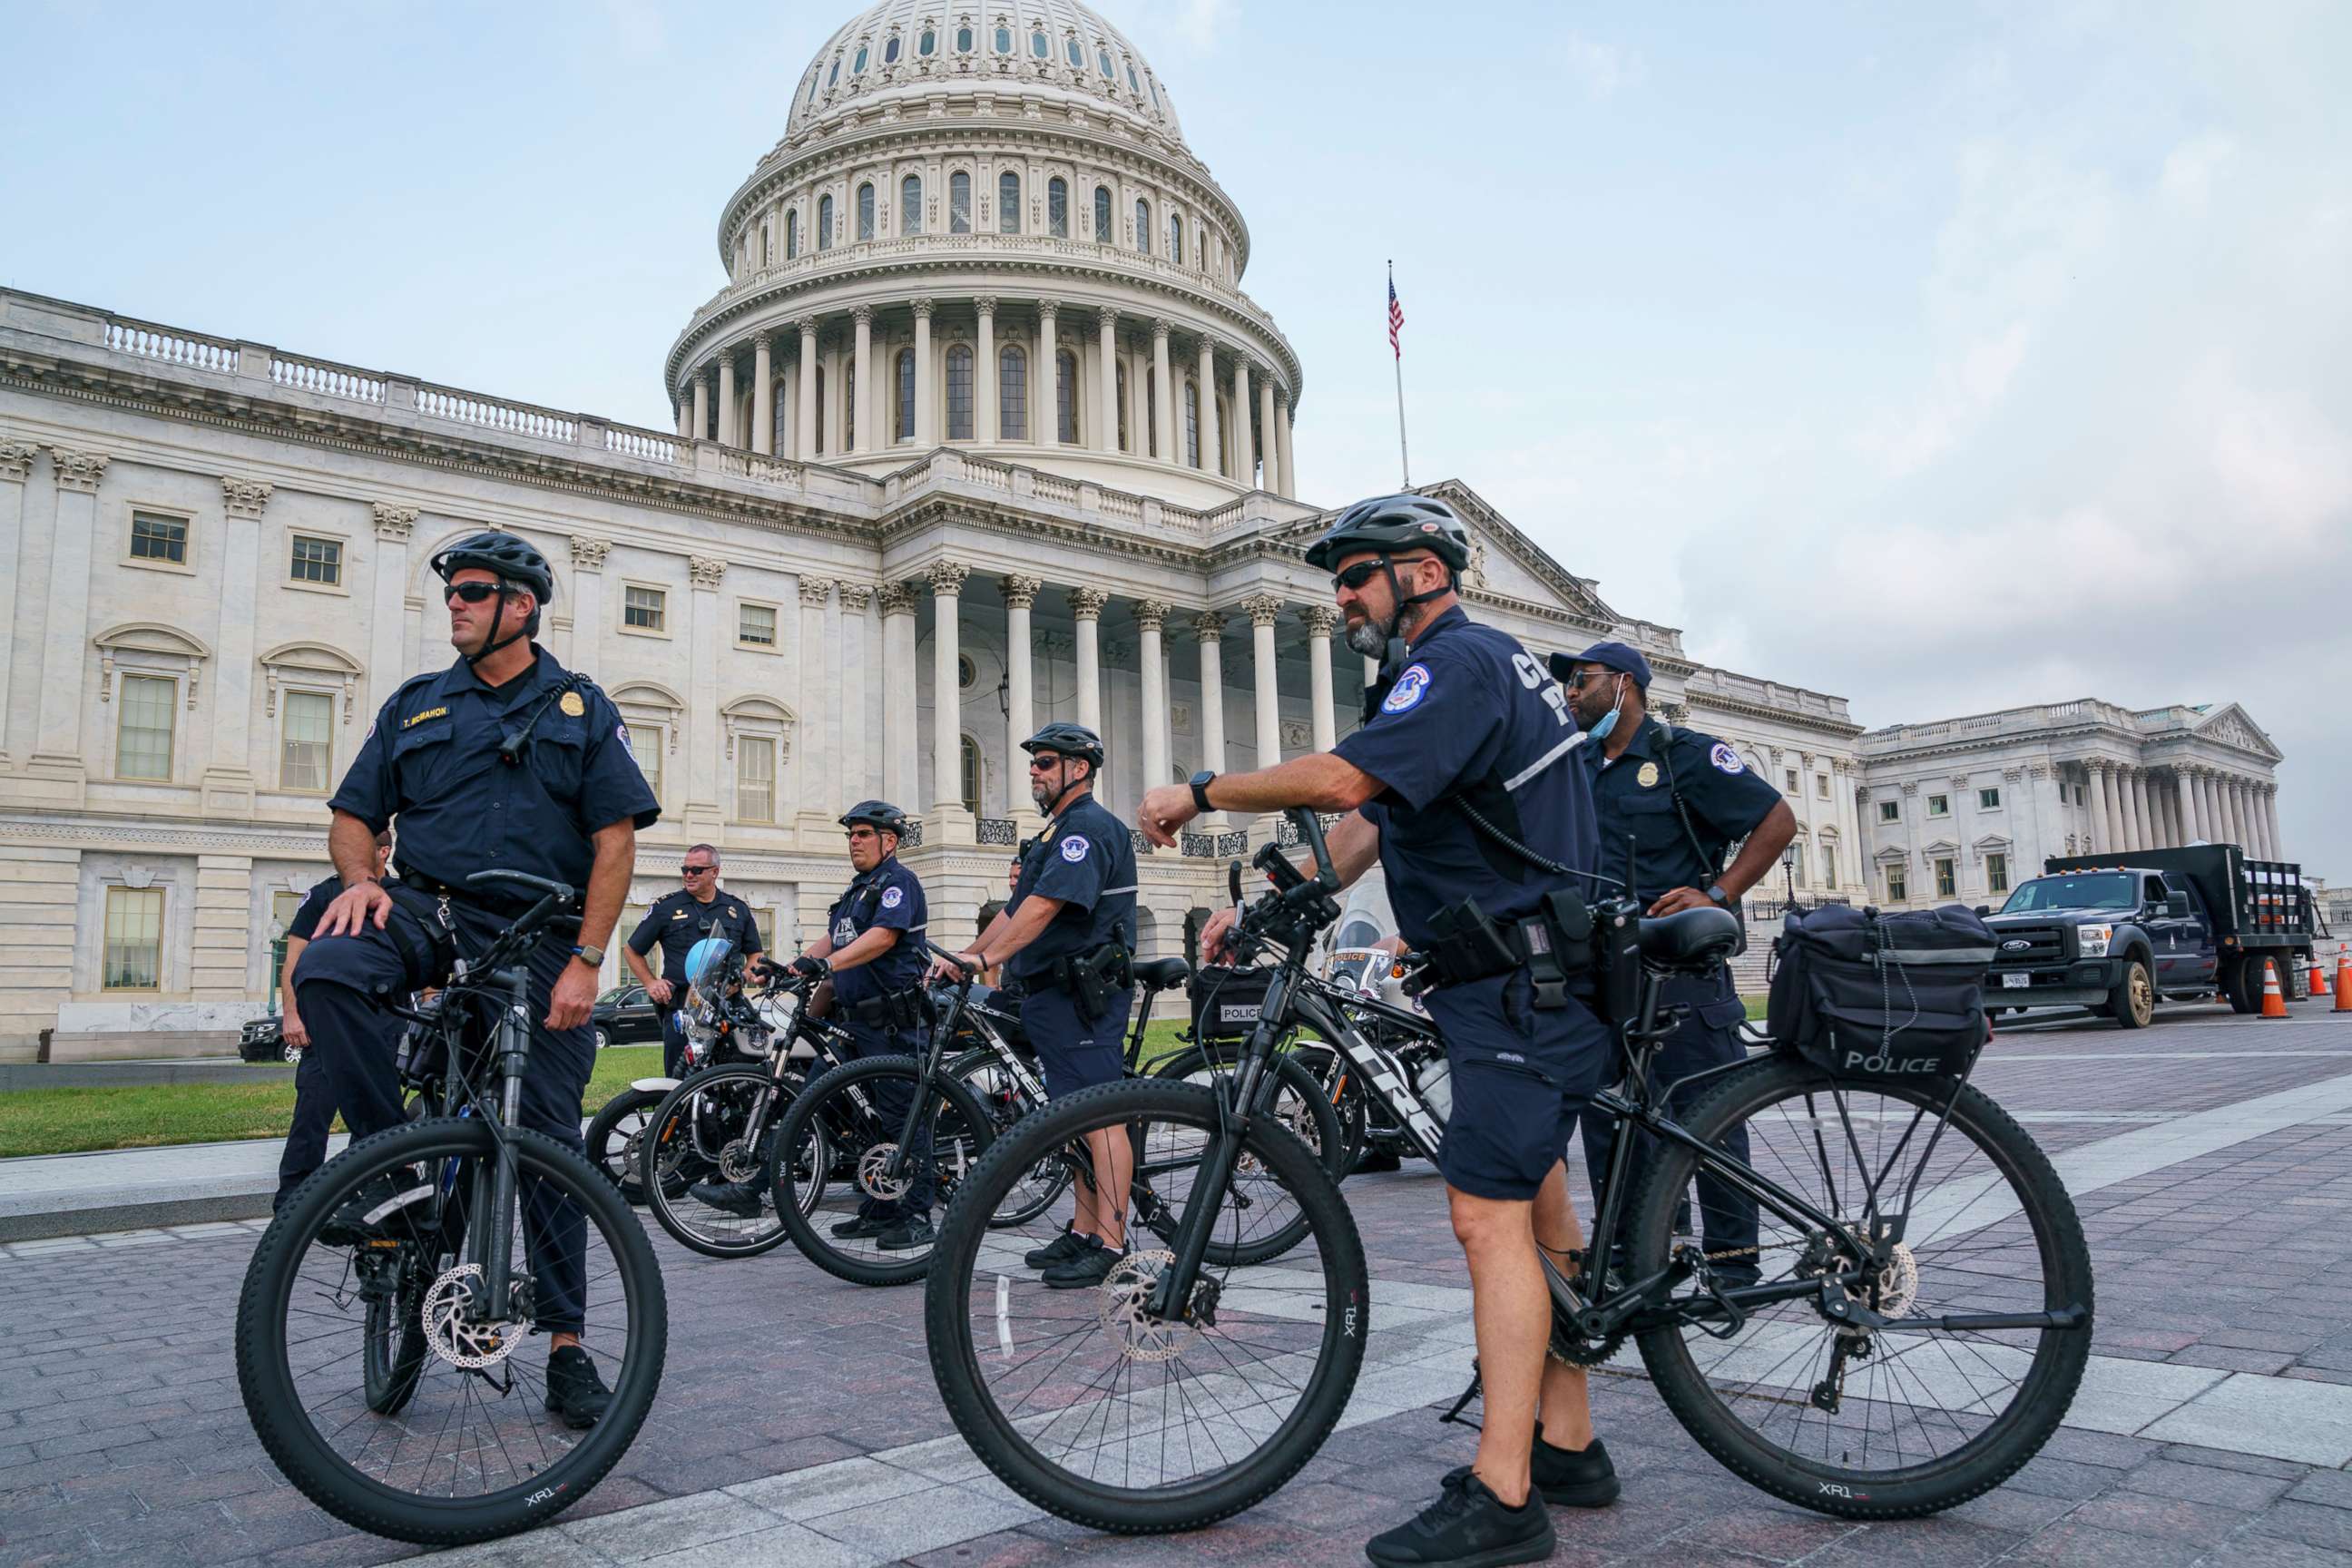 PHOTO: U.S. Capitol Police Mountain Bike officers secure the plaza as House Minority Leader Kevin McCarthy assembles his Republican colleagues on the steps of the Capitol in Washington, D.C., July 29, 2021.